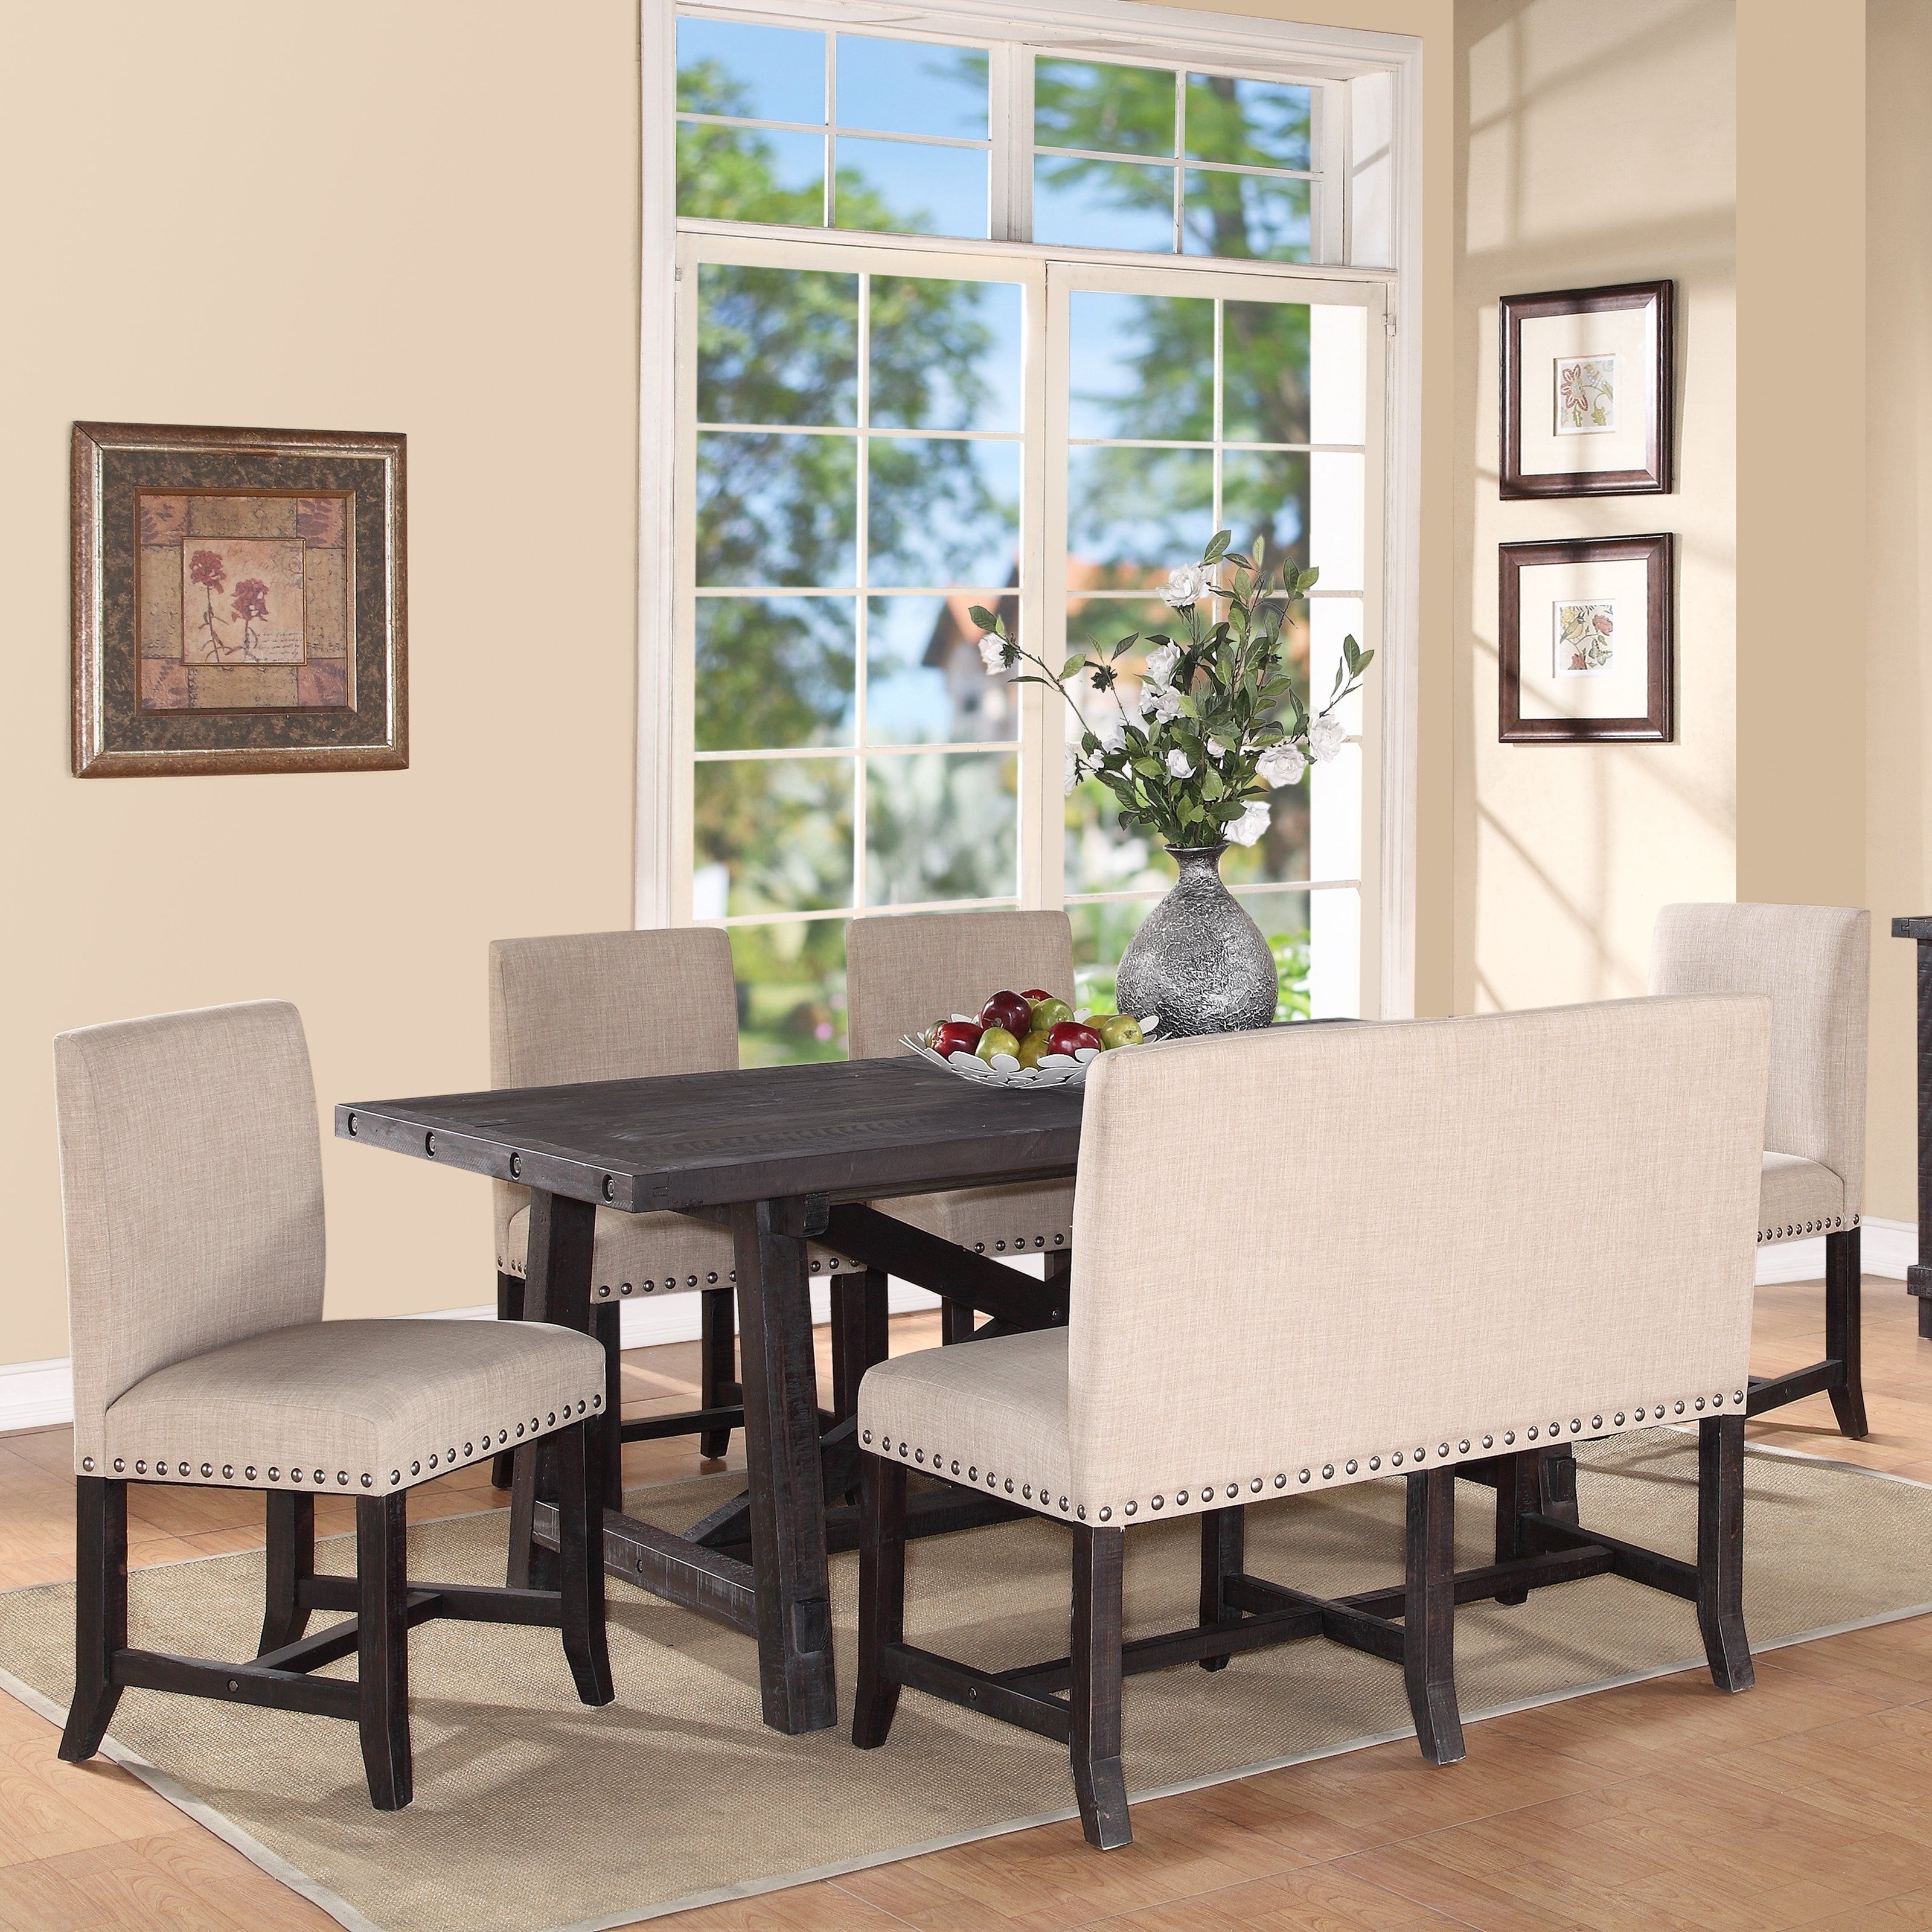 8 Dining Room Sets With Upholstered Chairs | Hospicehelpnow For Most Up To Date Jaxon 7 Piece Rectangle Dining Sets With Upholstered Chairs (View 15 of 20)